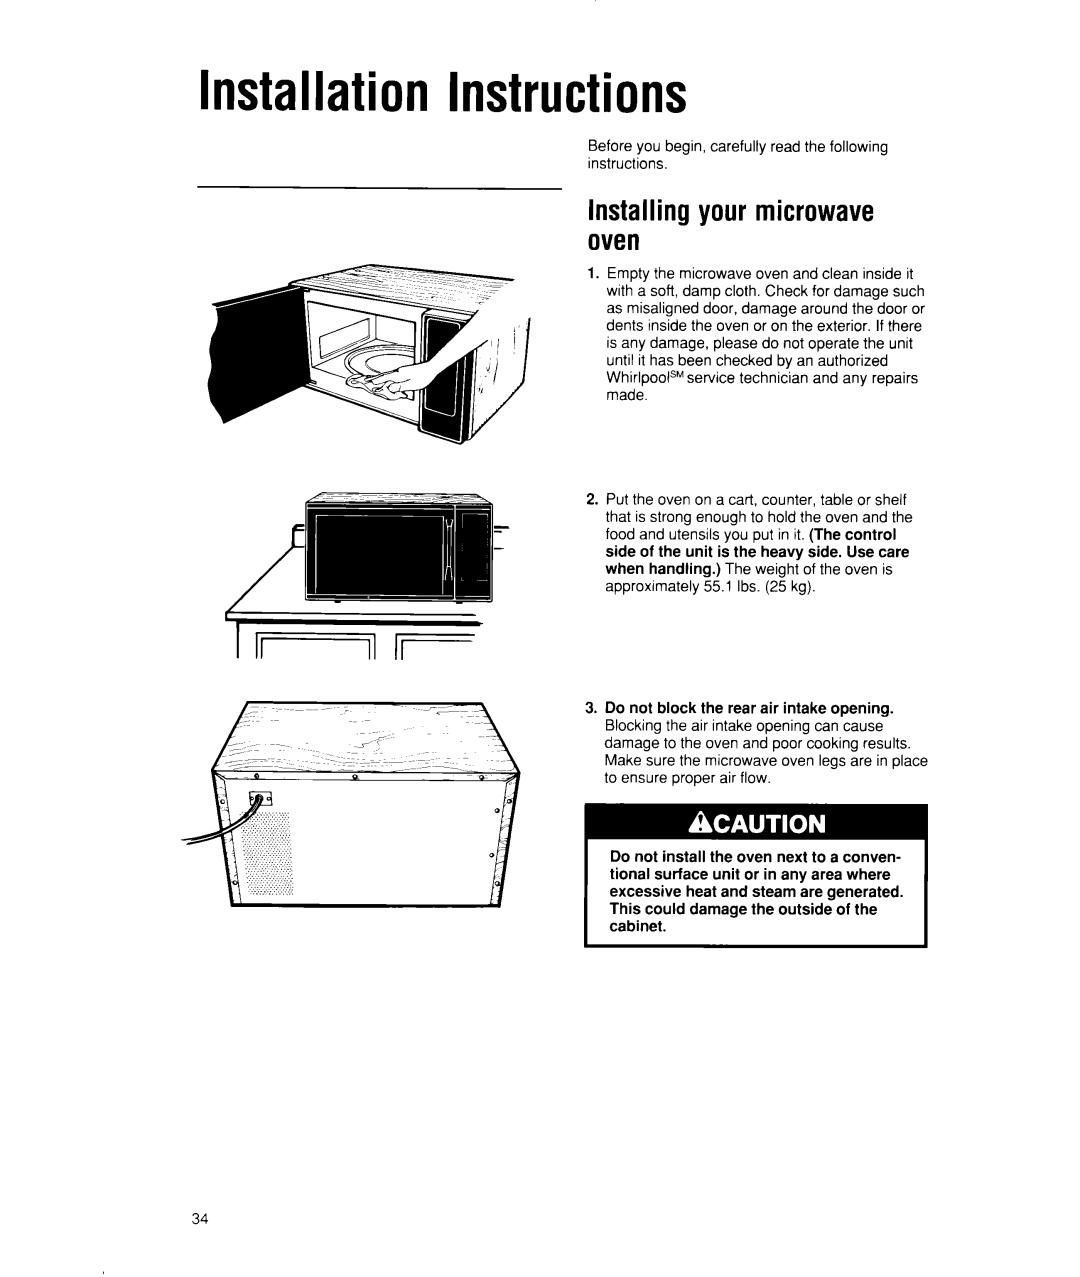 Whirlpool MW7500XW manual Installation Instructions, Installing your microwave oven 